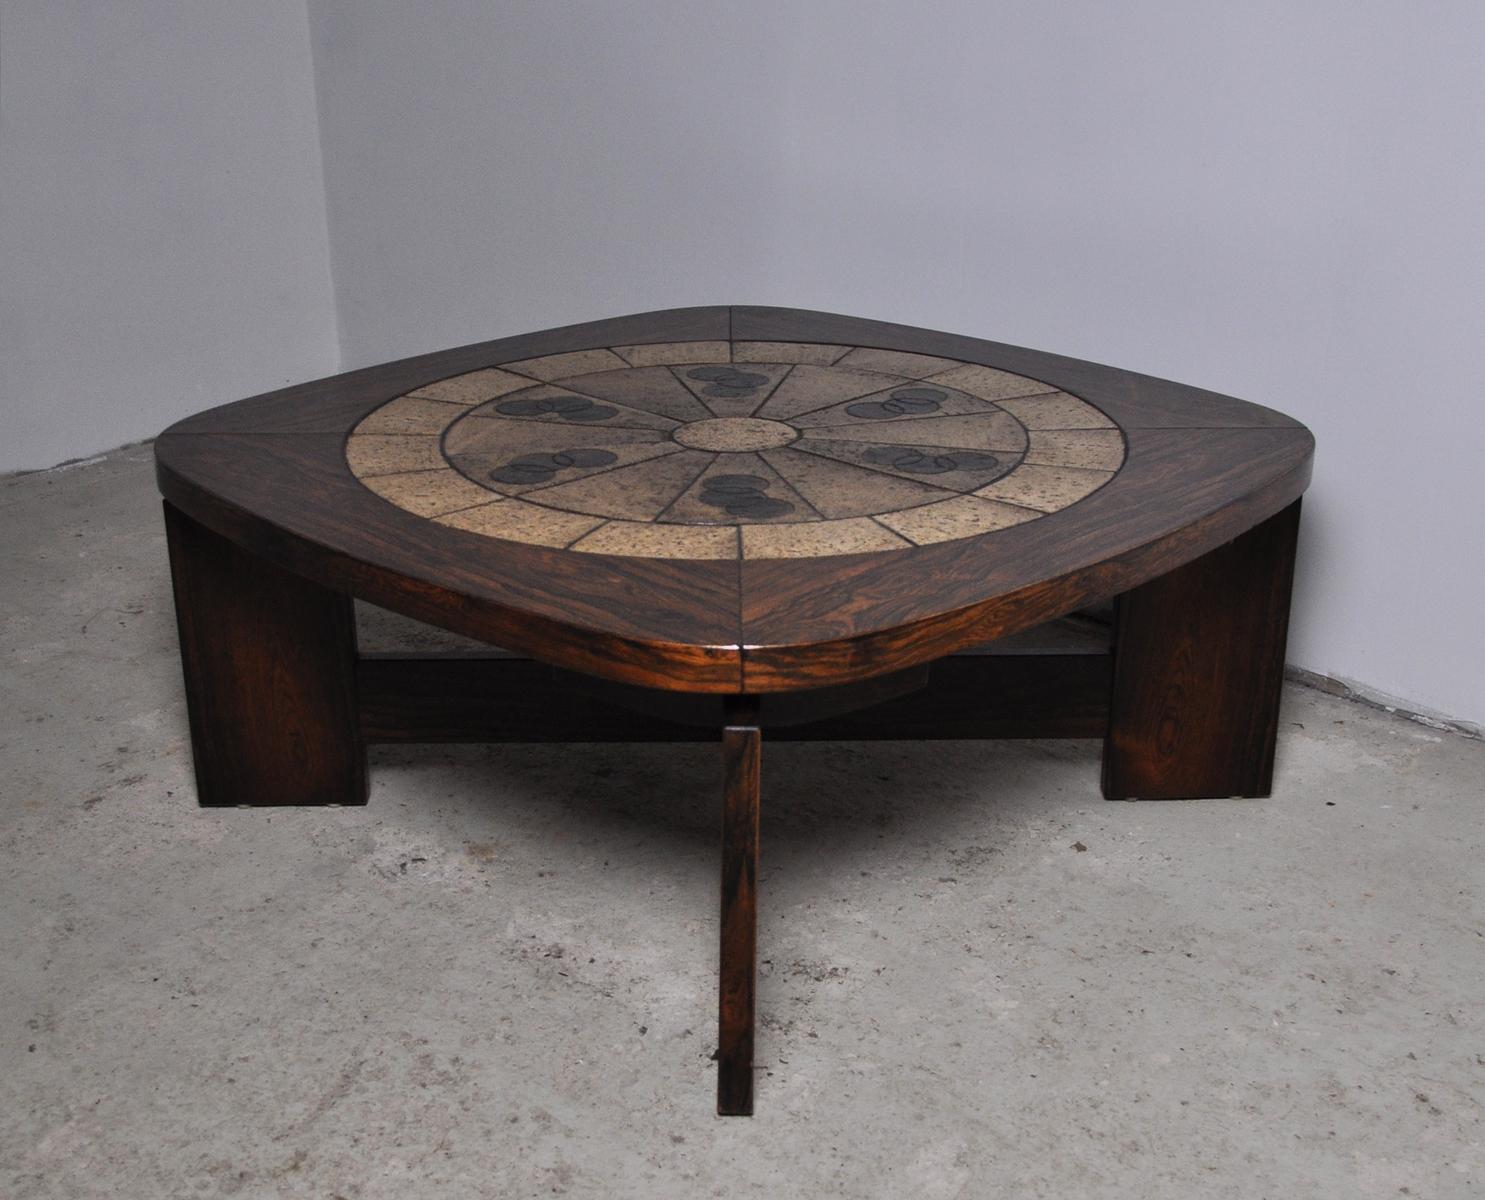 Scandinavian Modern Rosewood Coffee Table with Ceramic Tiles, 1970s For Sale